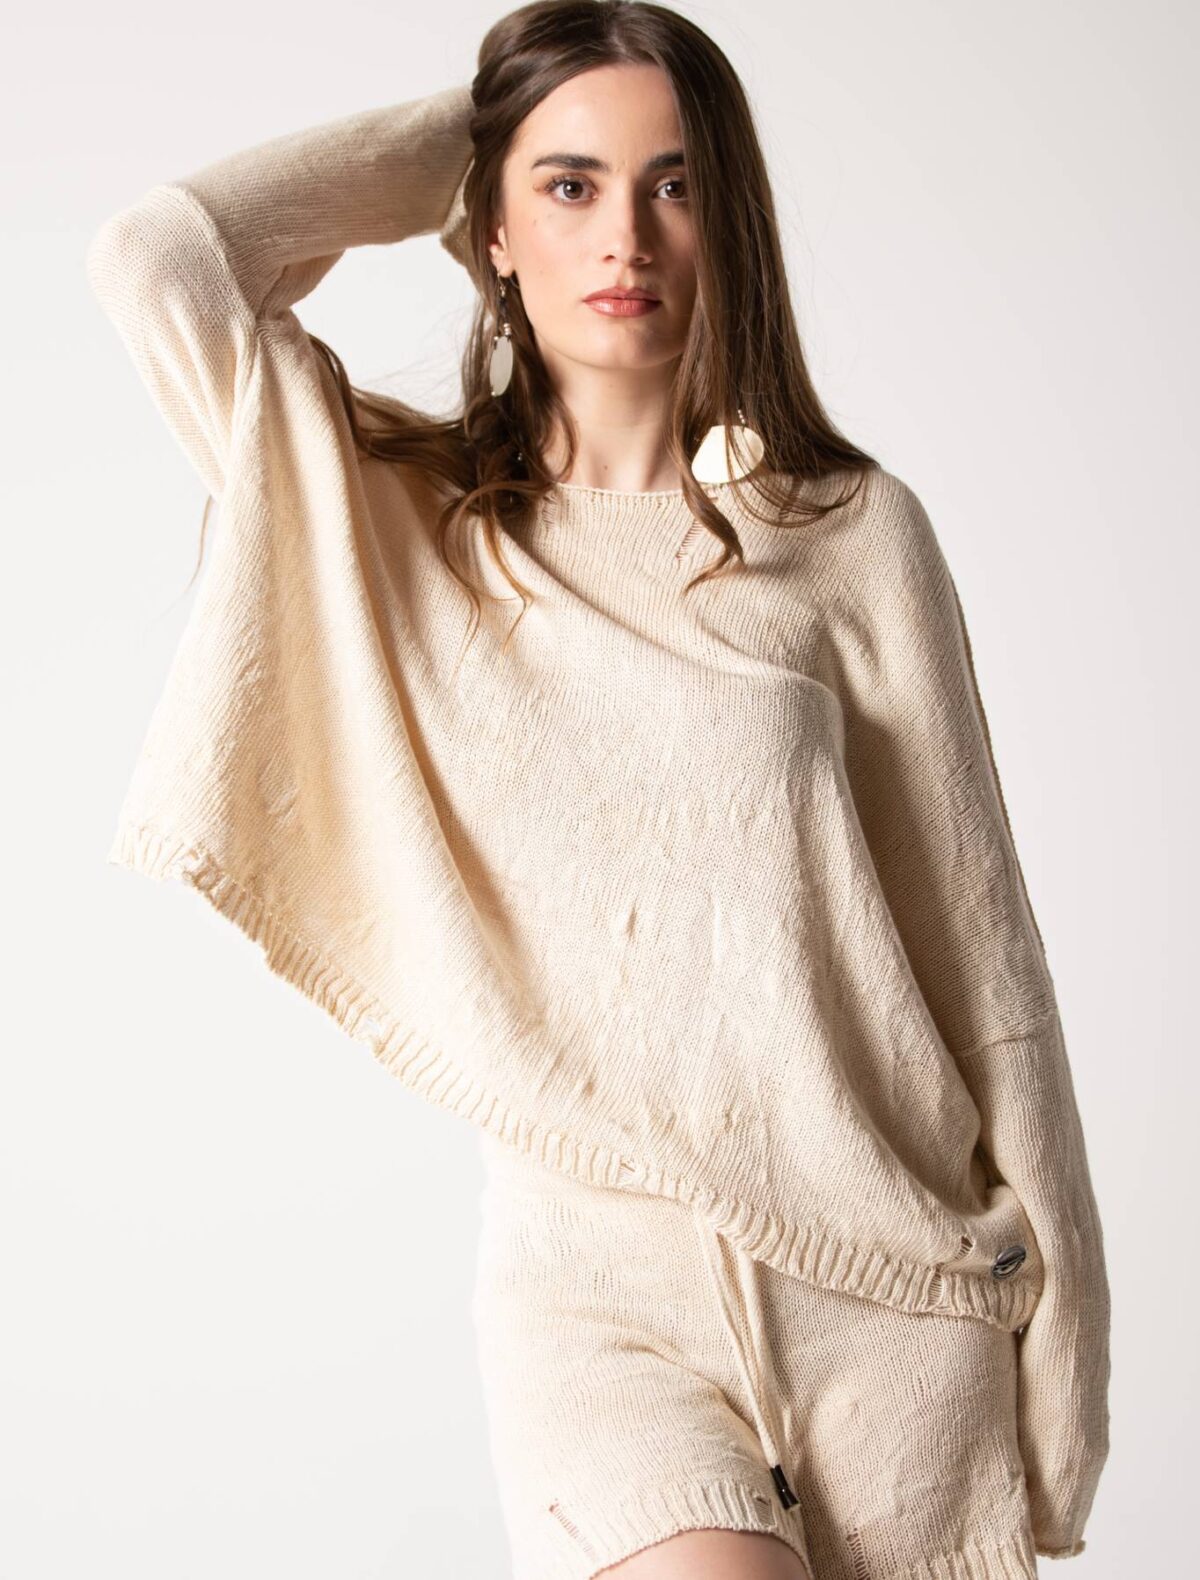 antidote_knitted_top_blouse_off_white_new_collection